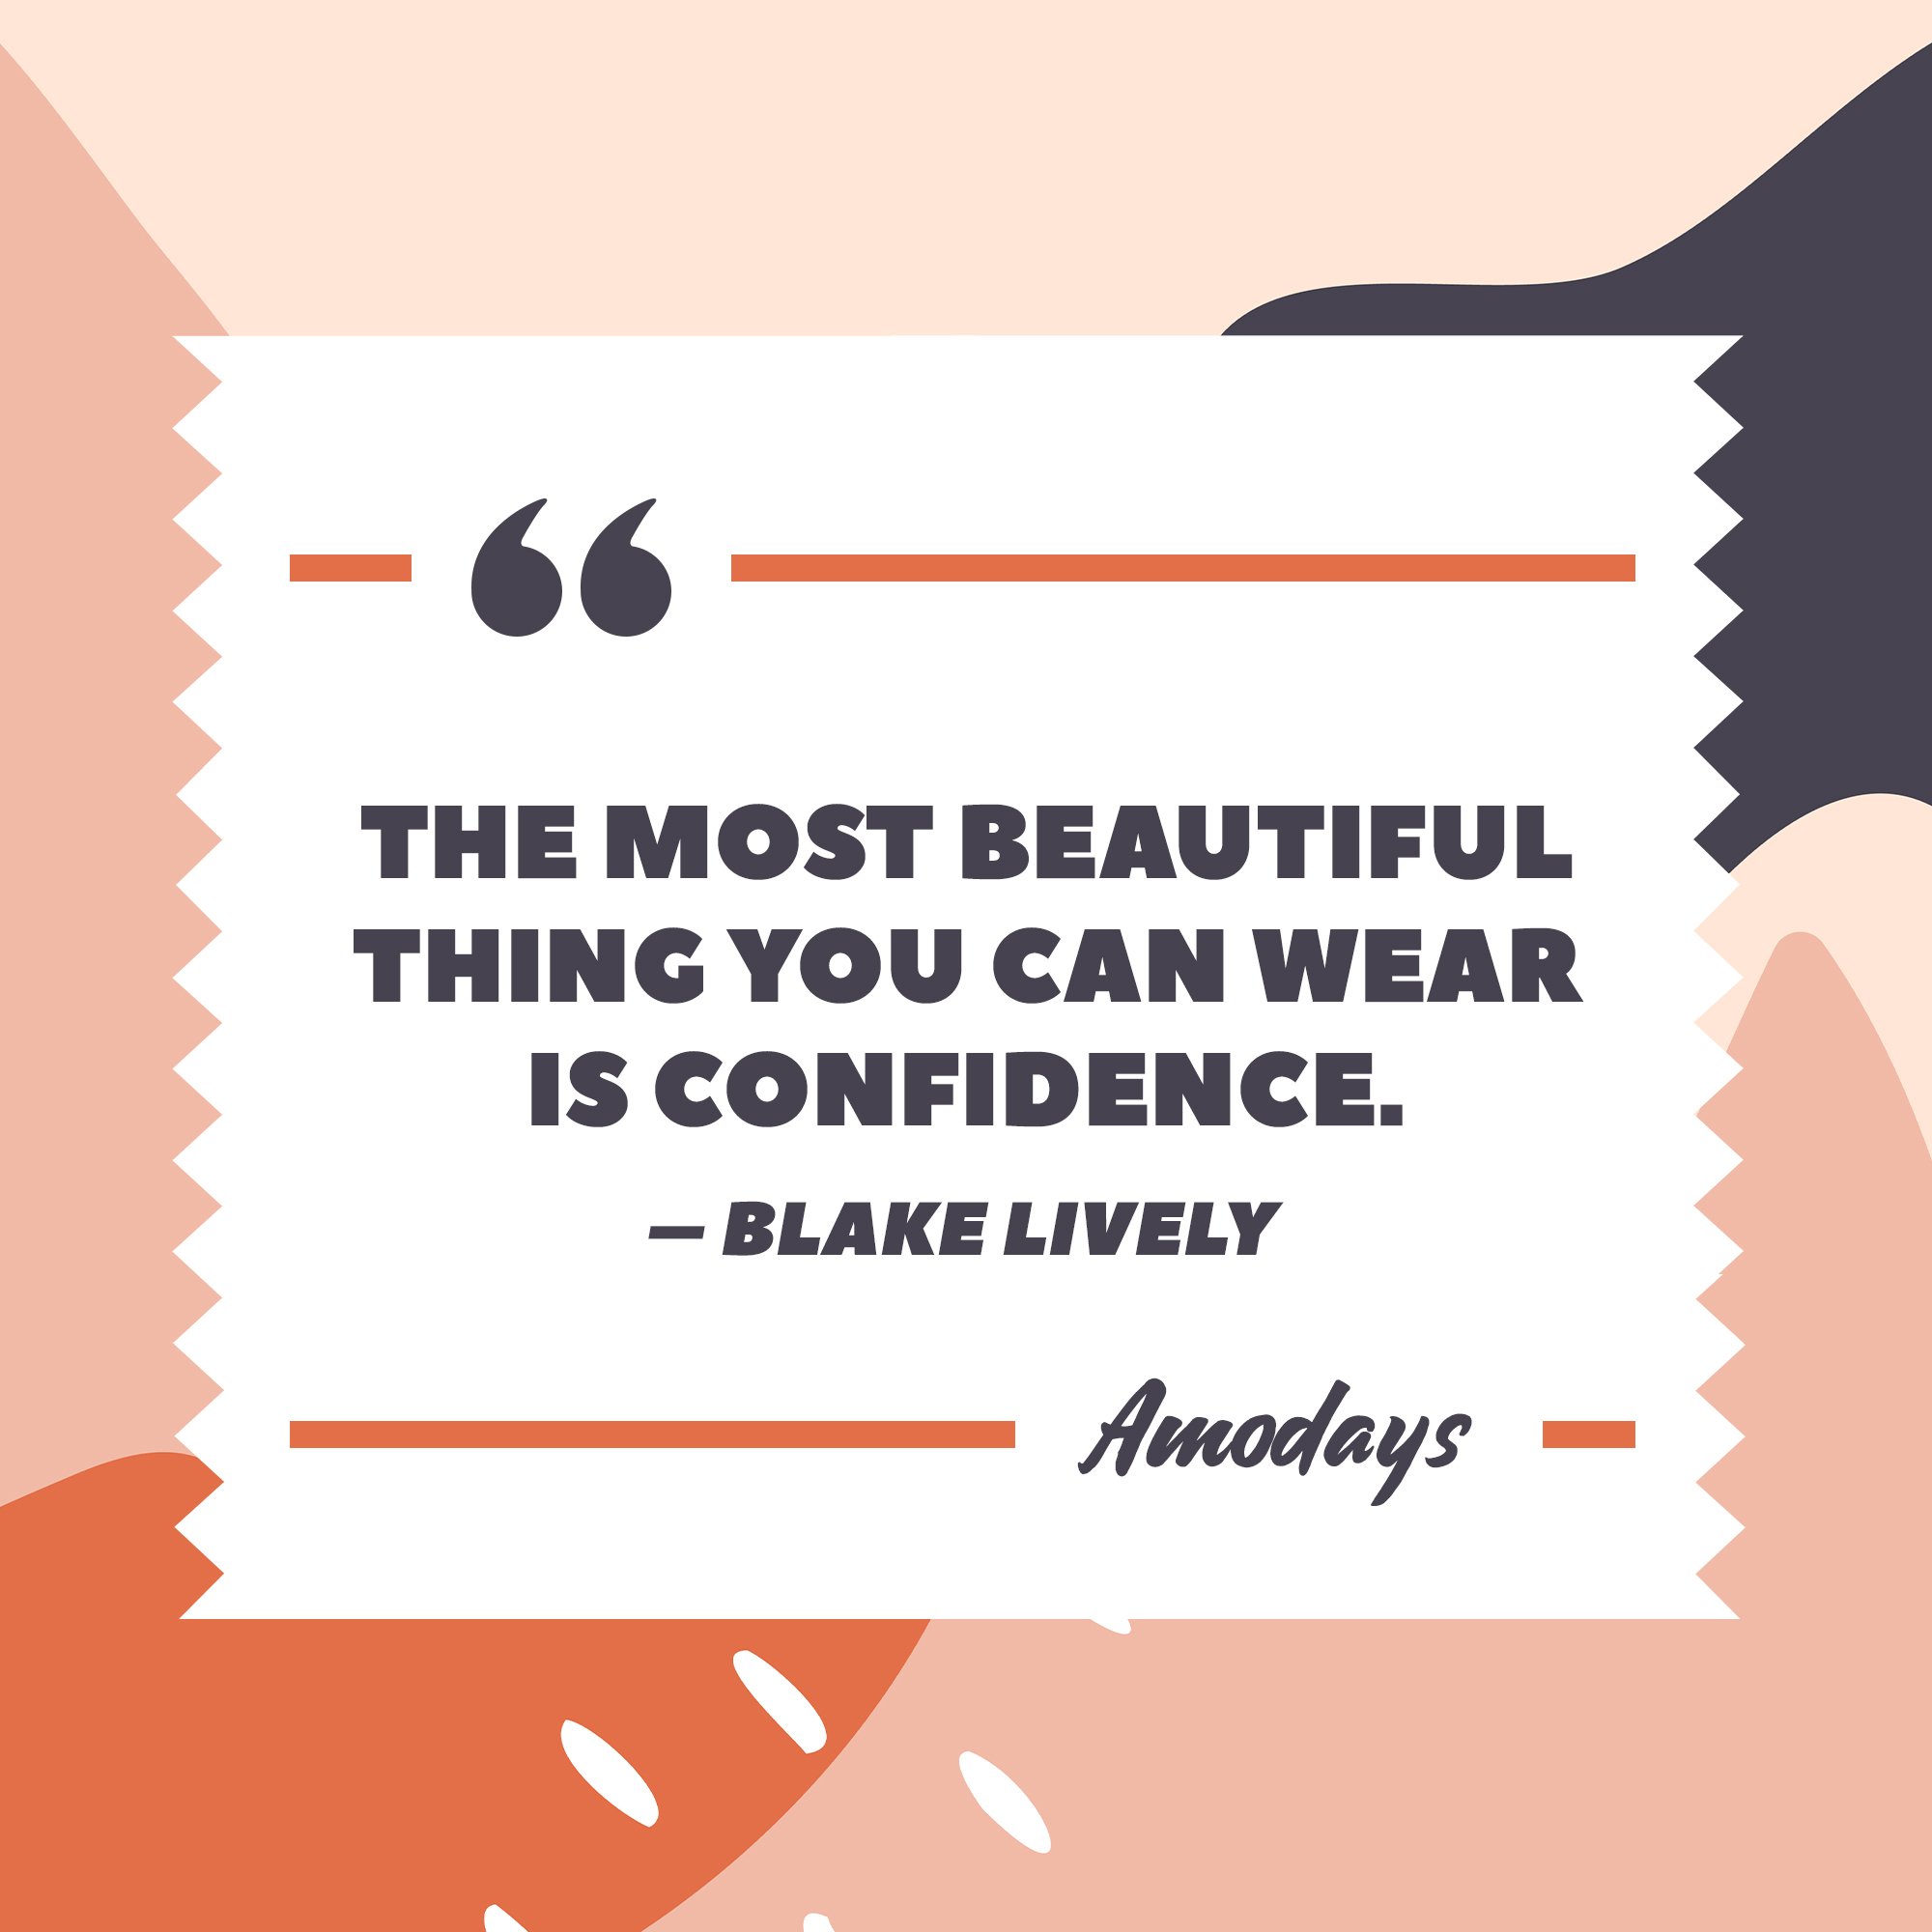 Blake Lively's quote “The most beautiful thing you can wear is confidence.” | Image: AmoDays 